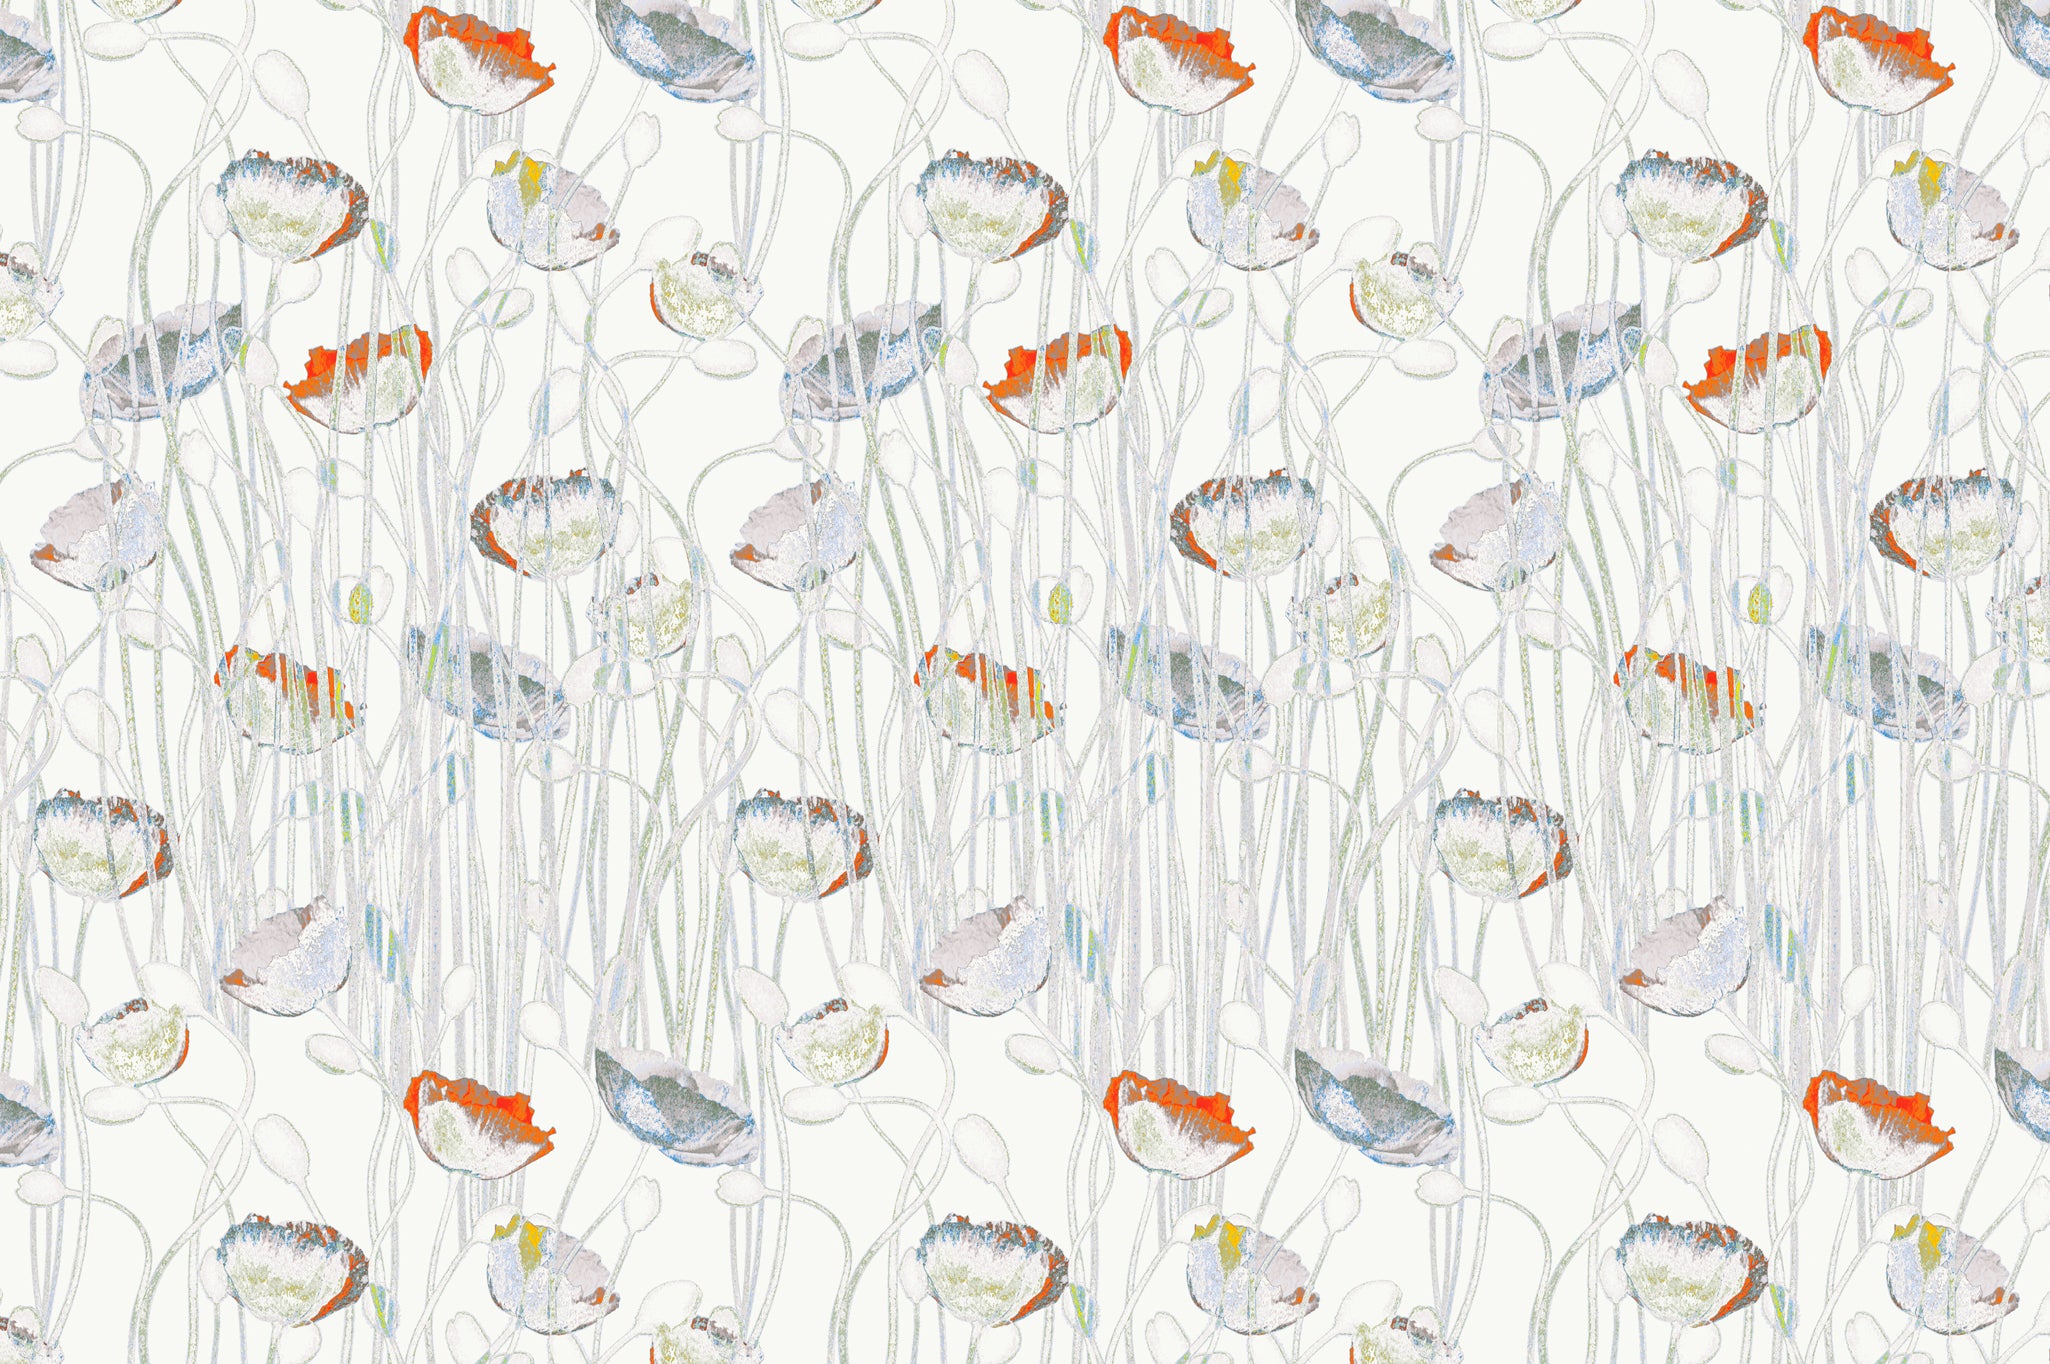 Detail of wallpaper in a dense poppy print in shades of orange, white and blue on a white field.